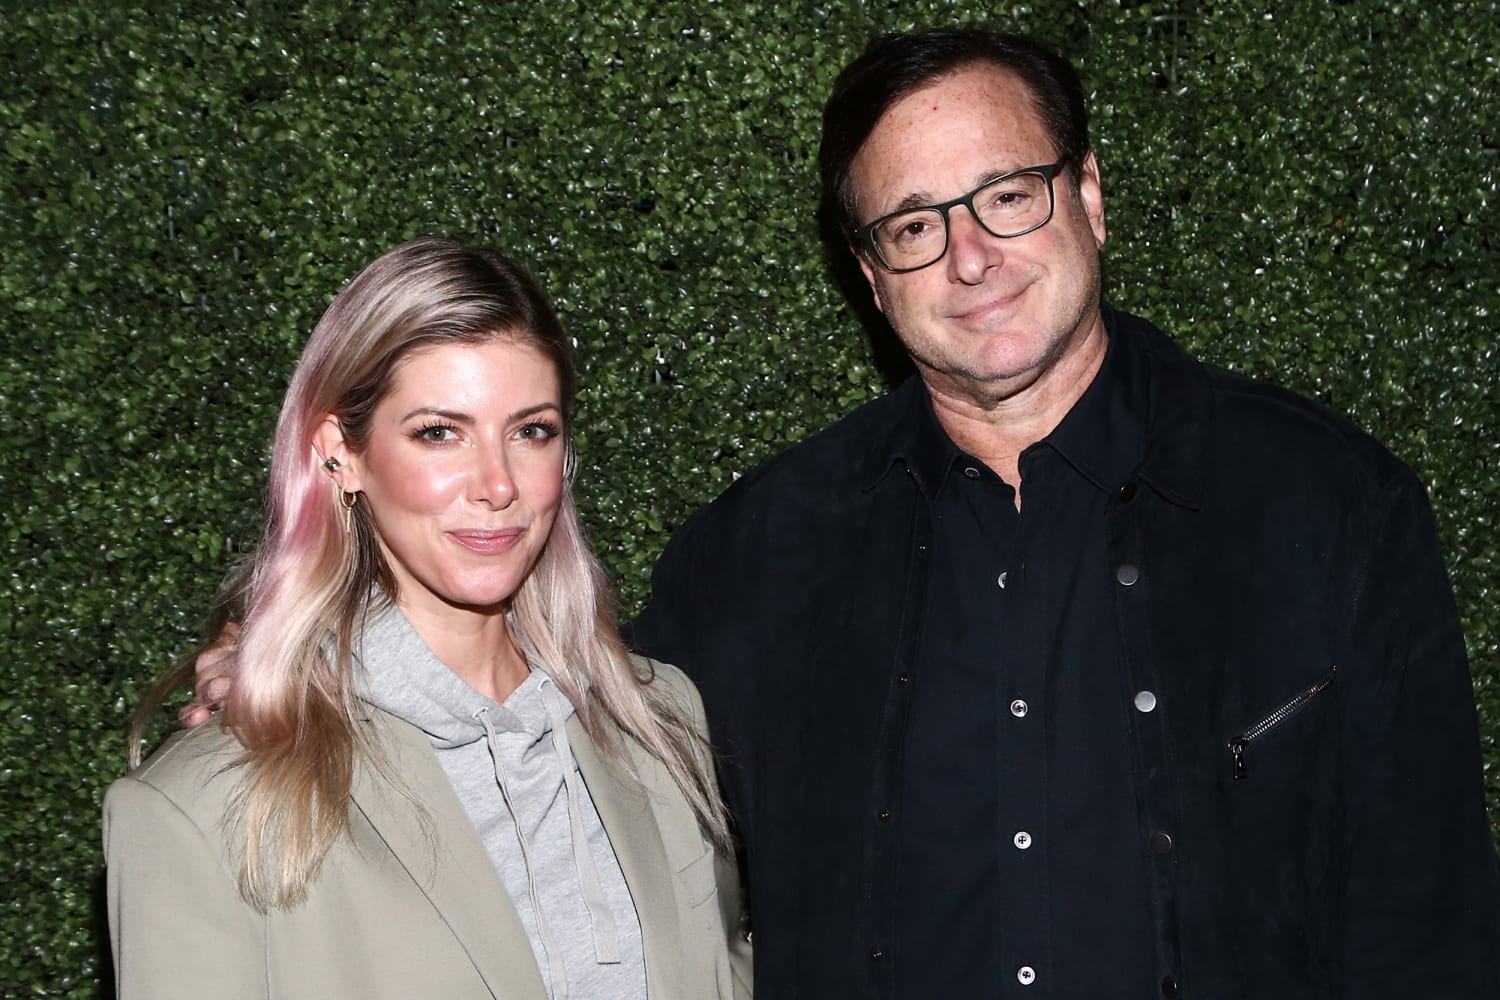 Bob Saget’s wife speaks out on her grief: 'We valued every single second that we had together'